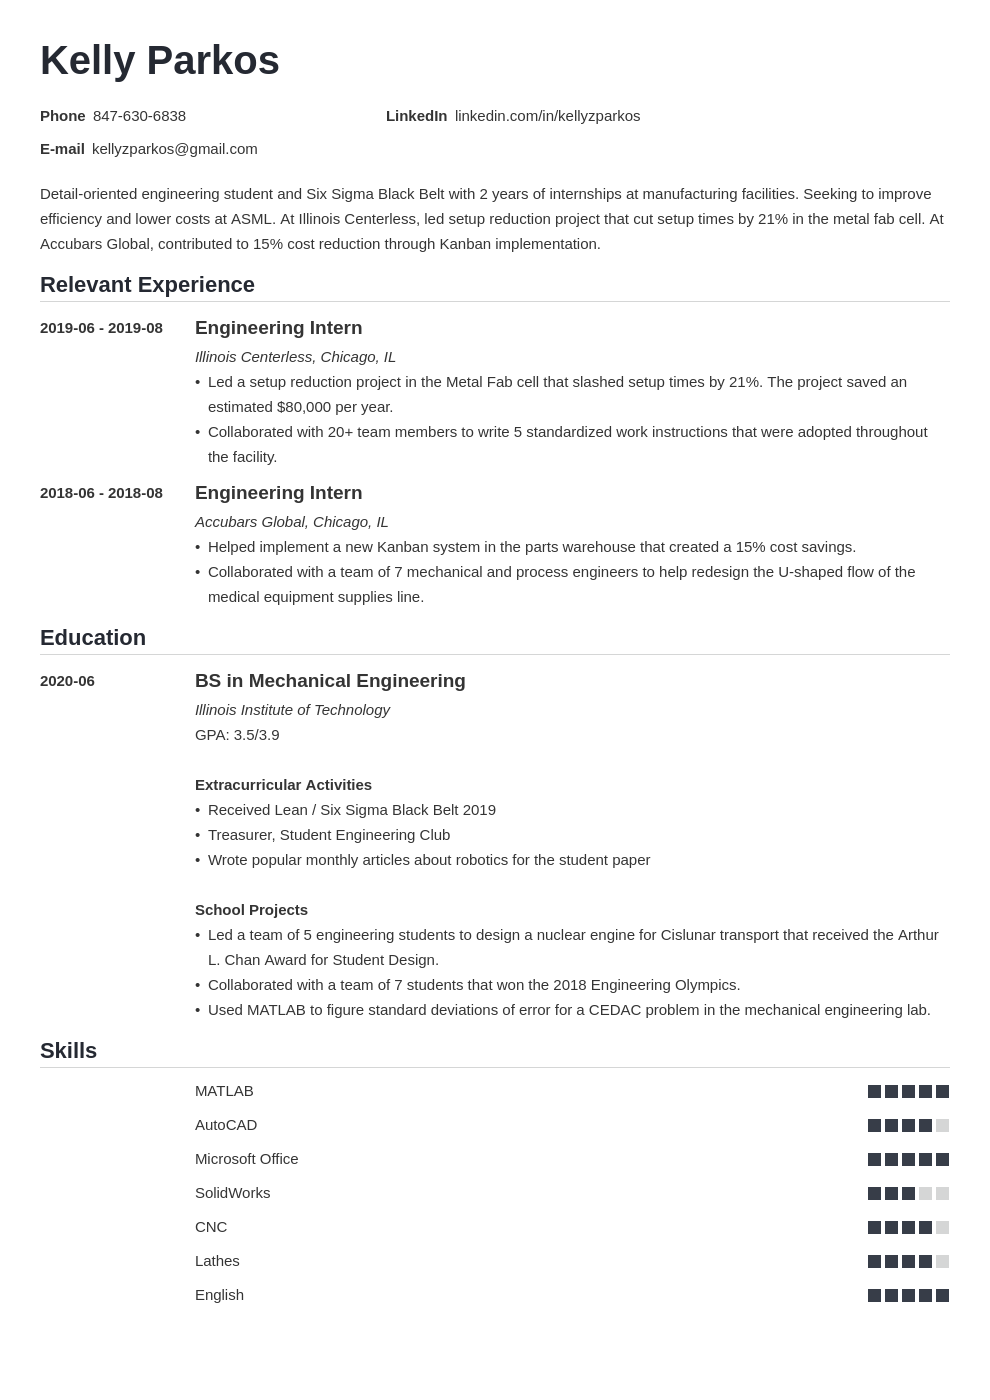 resume examples for engineering students